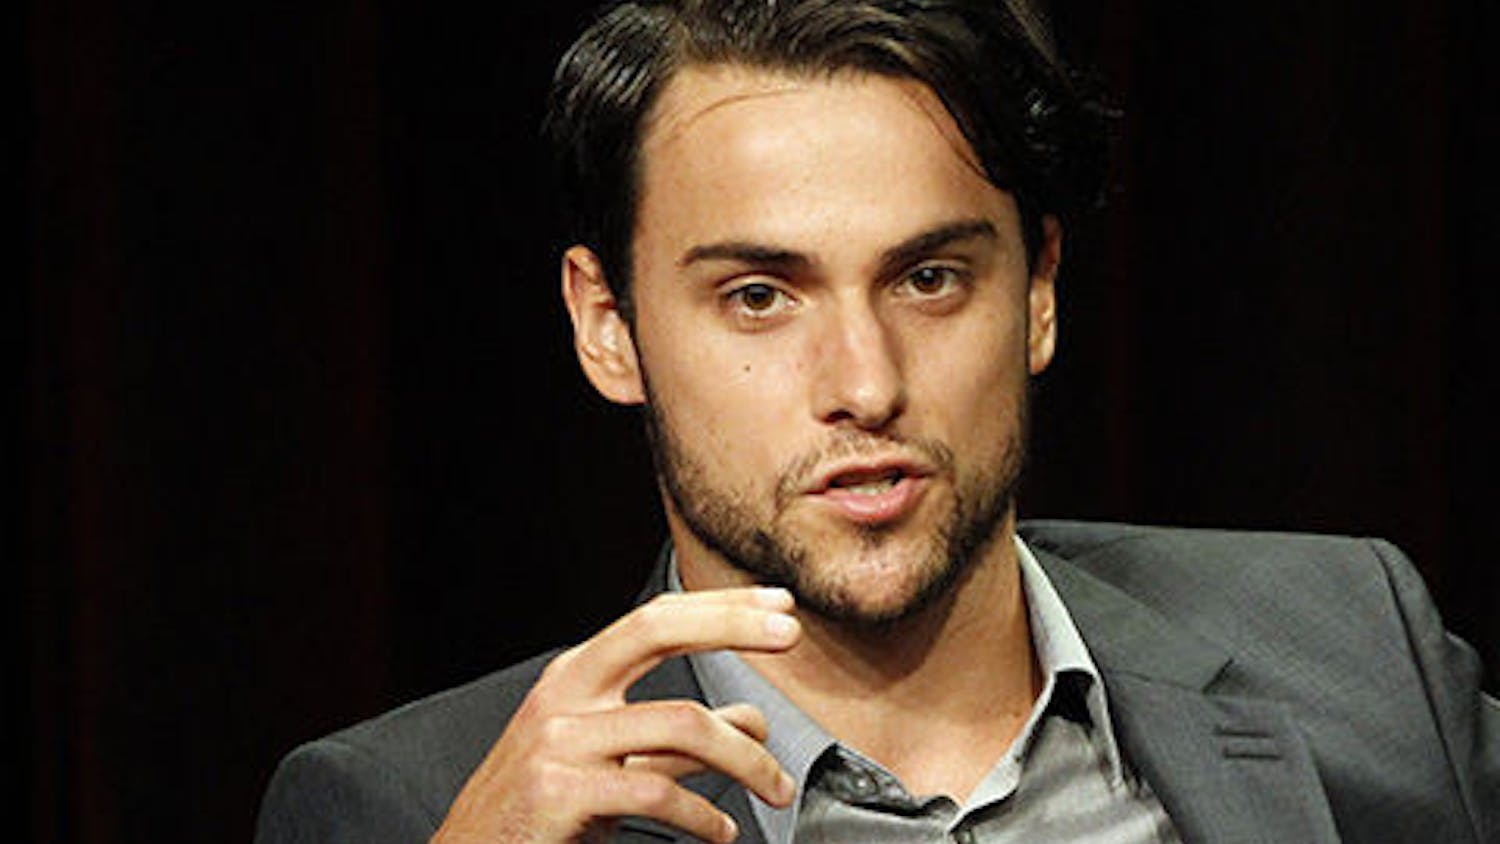 TCA SUMMER PRESS TOUR 2014 - "How to Get Away with Murder" Session - The cast and producers of ABC's "How to Get Away with Murder" addressed the press at Disney | ABC Television Group's Summer Press Tour 2014. (ABC/Rick Rowell) JACK FALAHEE